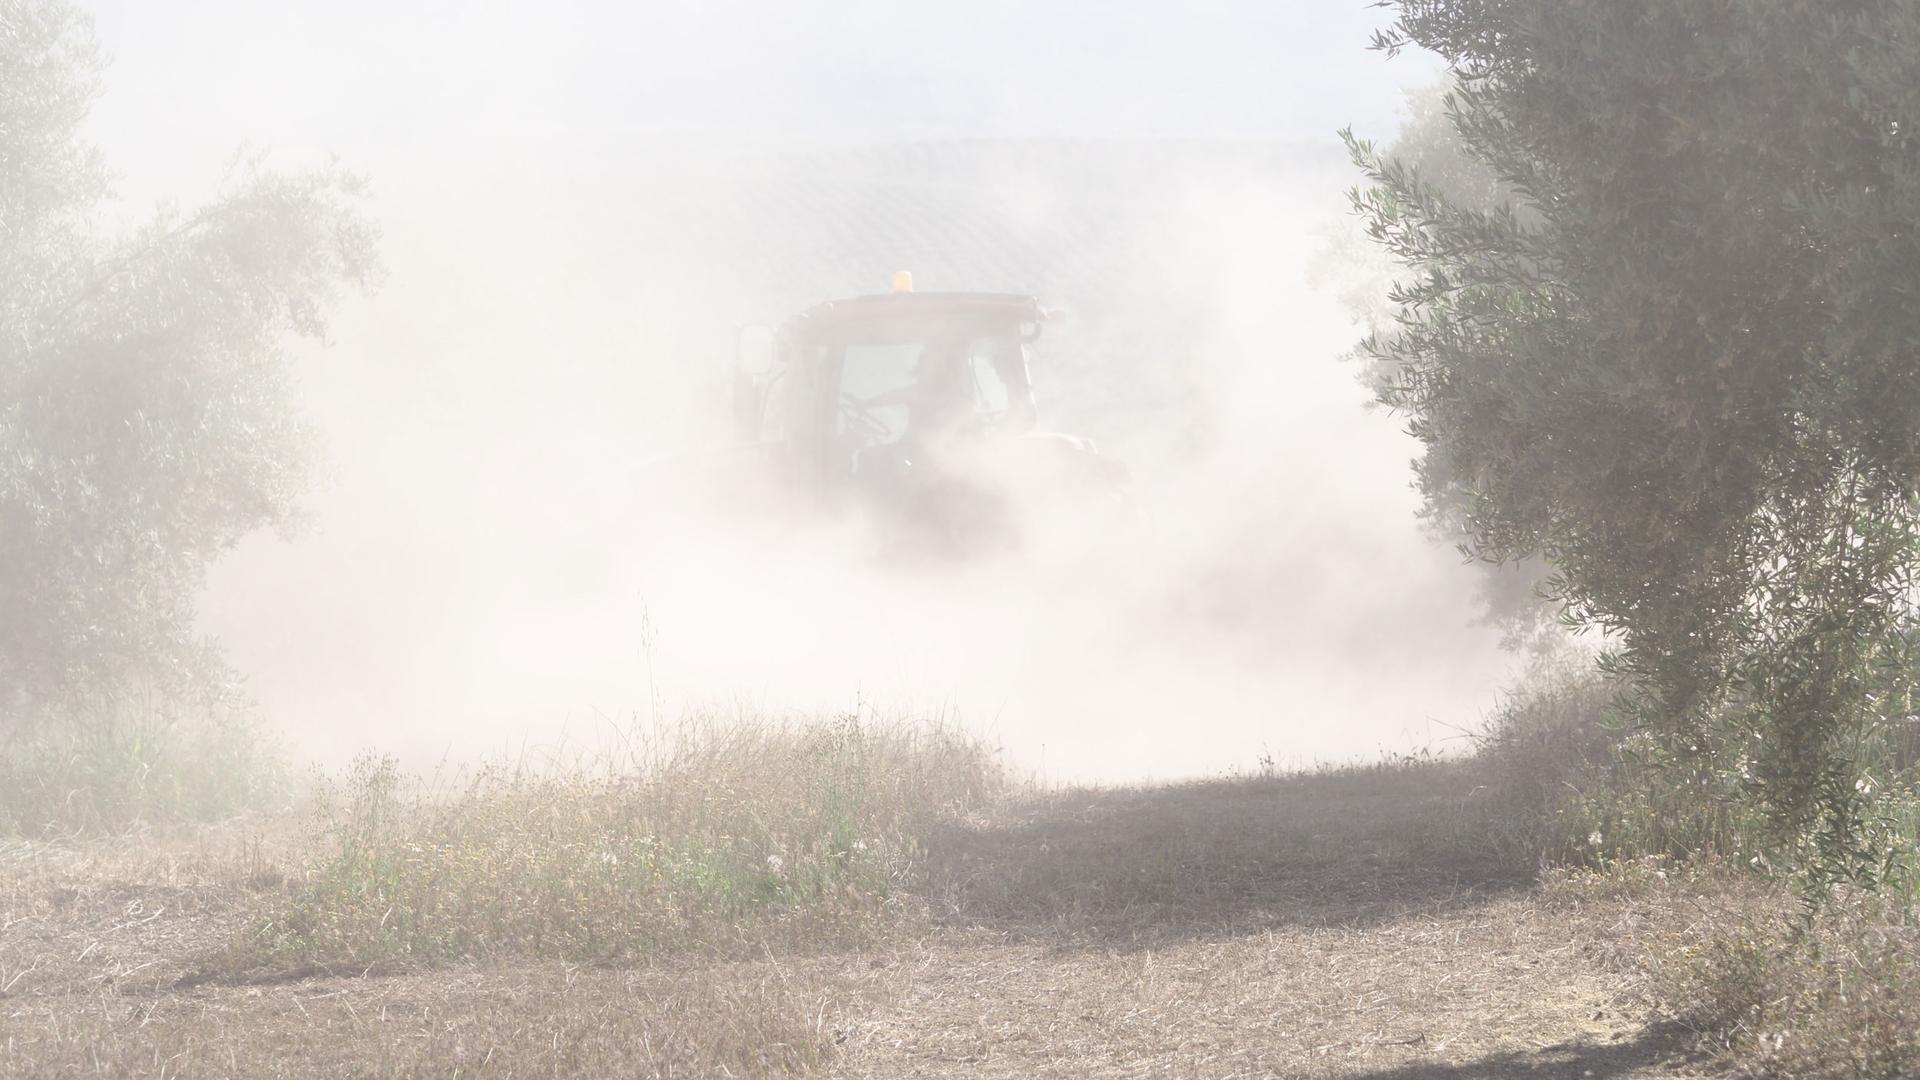 Topsoil dust kicks up from a tractor.